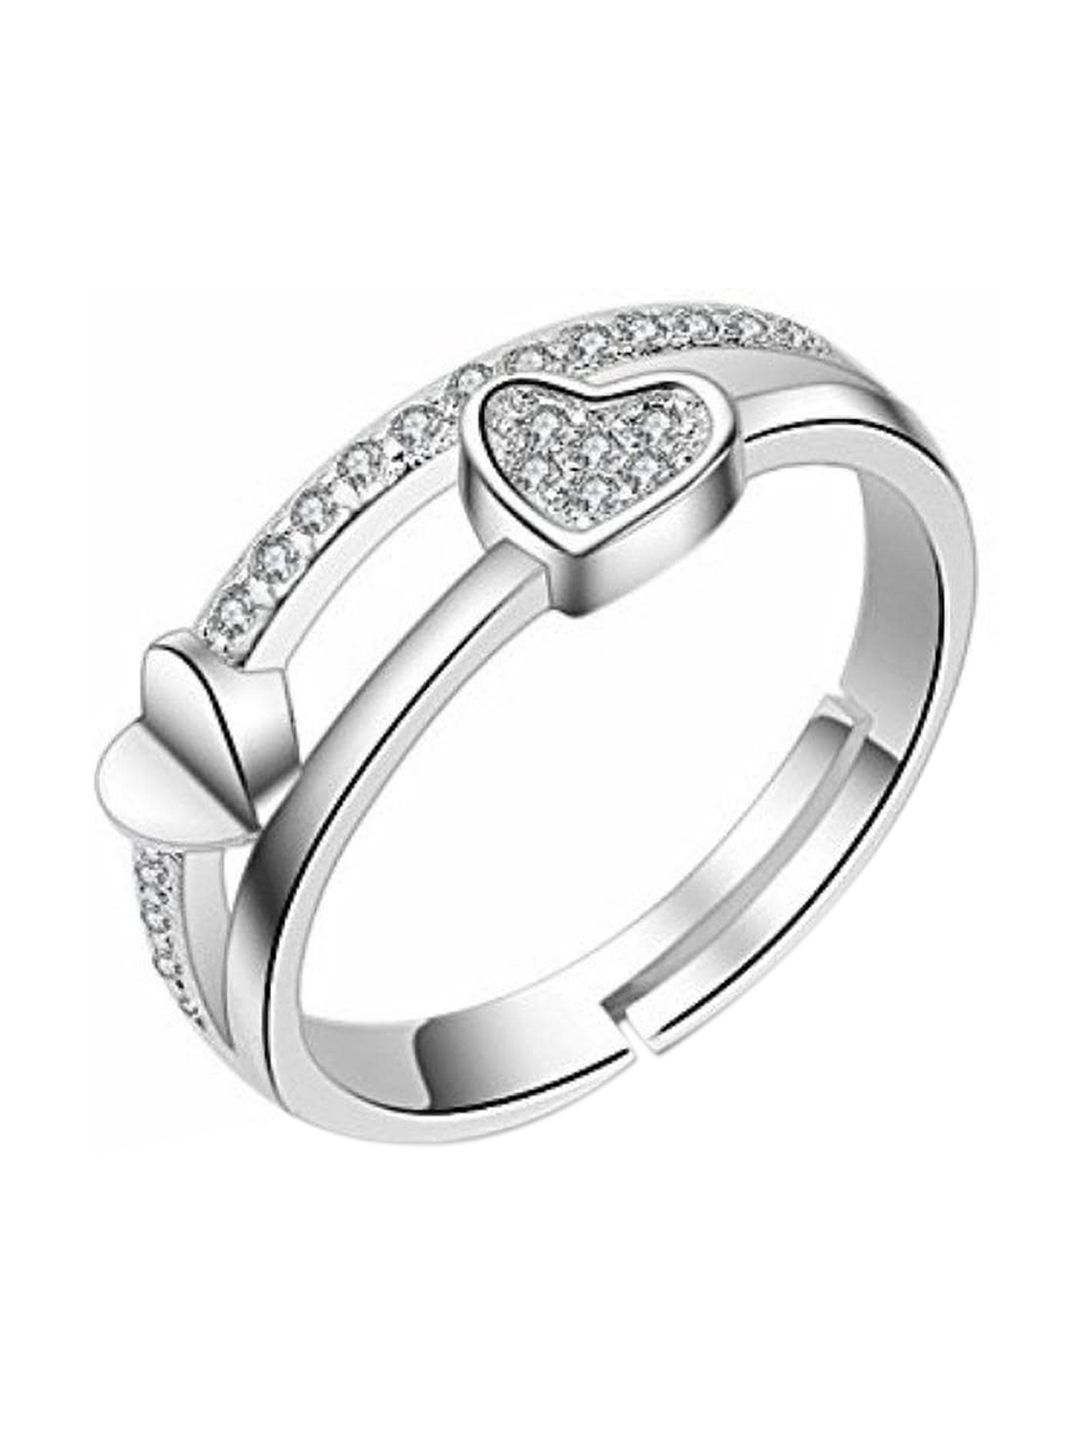 Sarvda Siver-Plated Heart Finger Ring Price in India